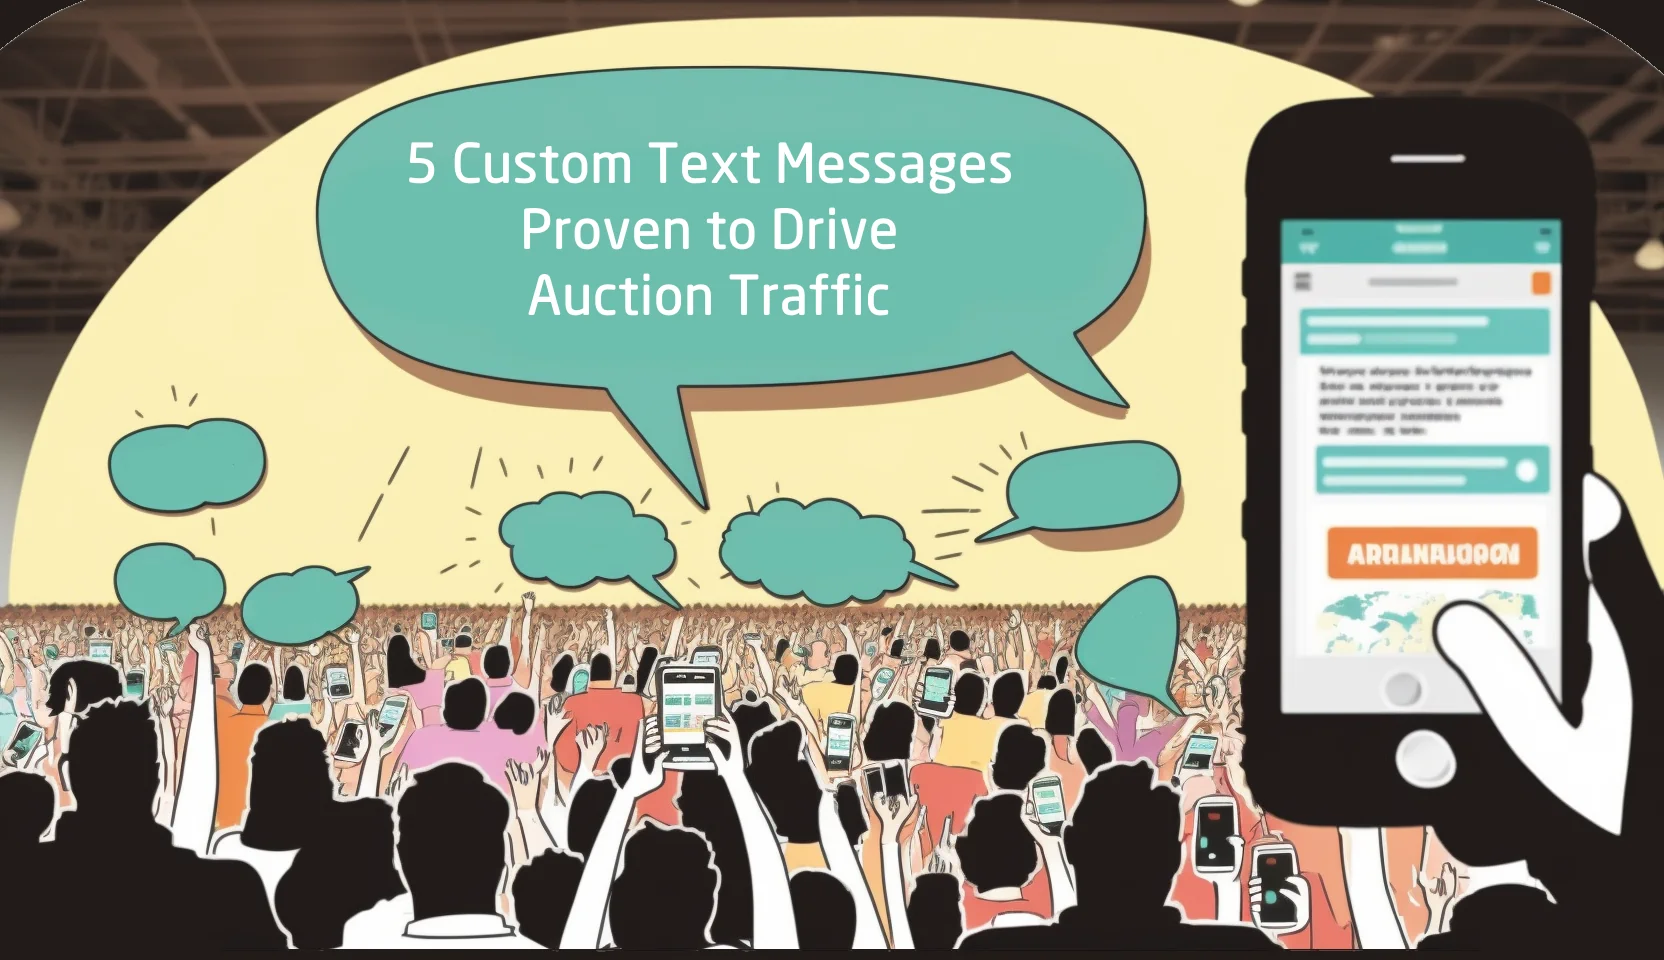 5 Custom Text Messages Proven to Drive Auction Traffic